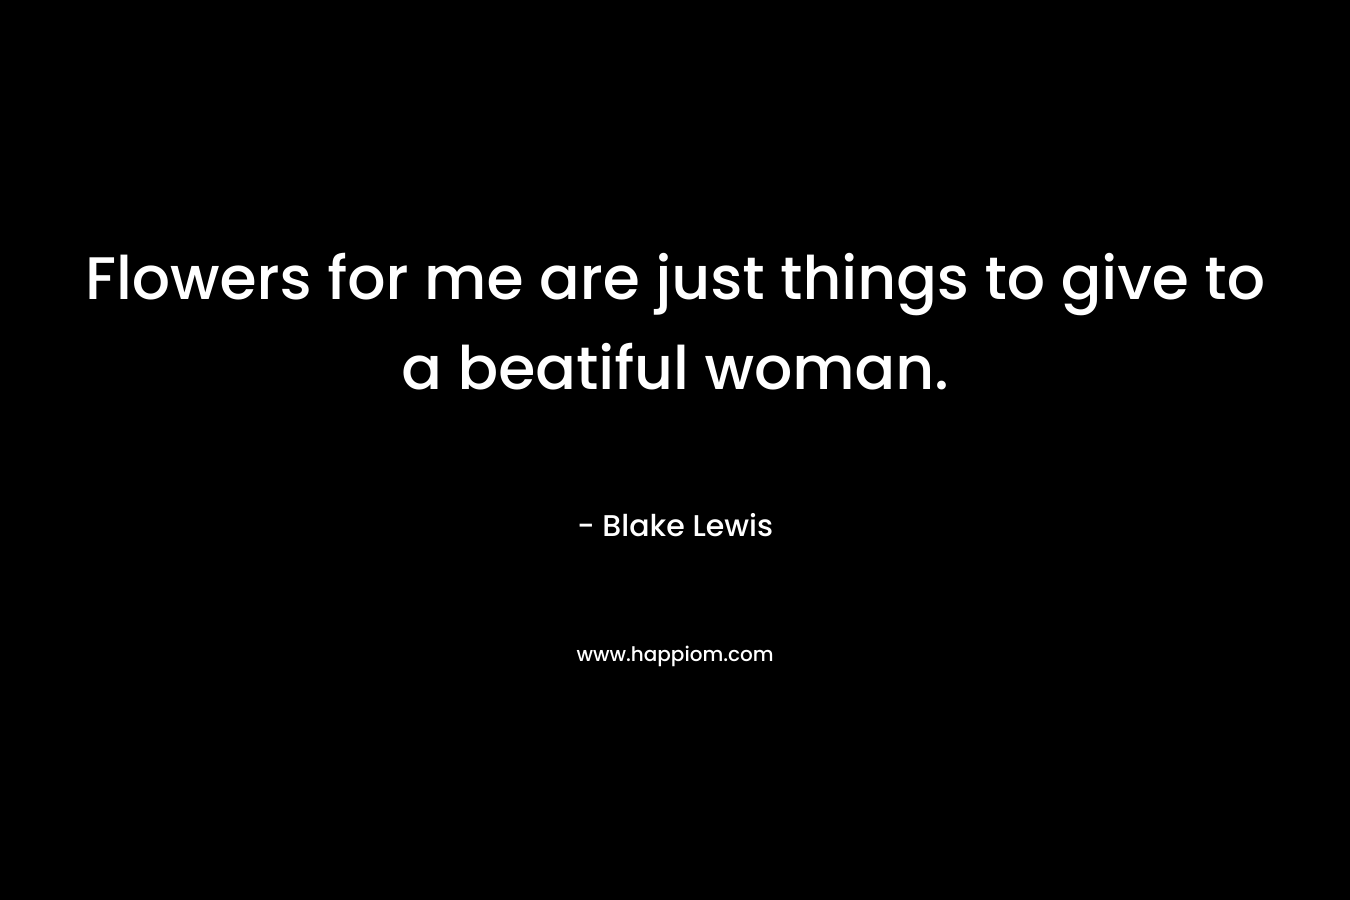 Flowers for me are just things to give to a beatiful woman. – Blake Lewis